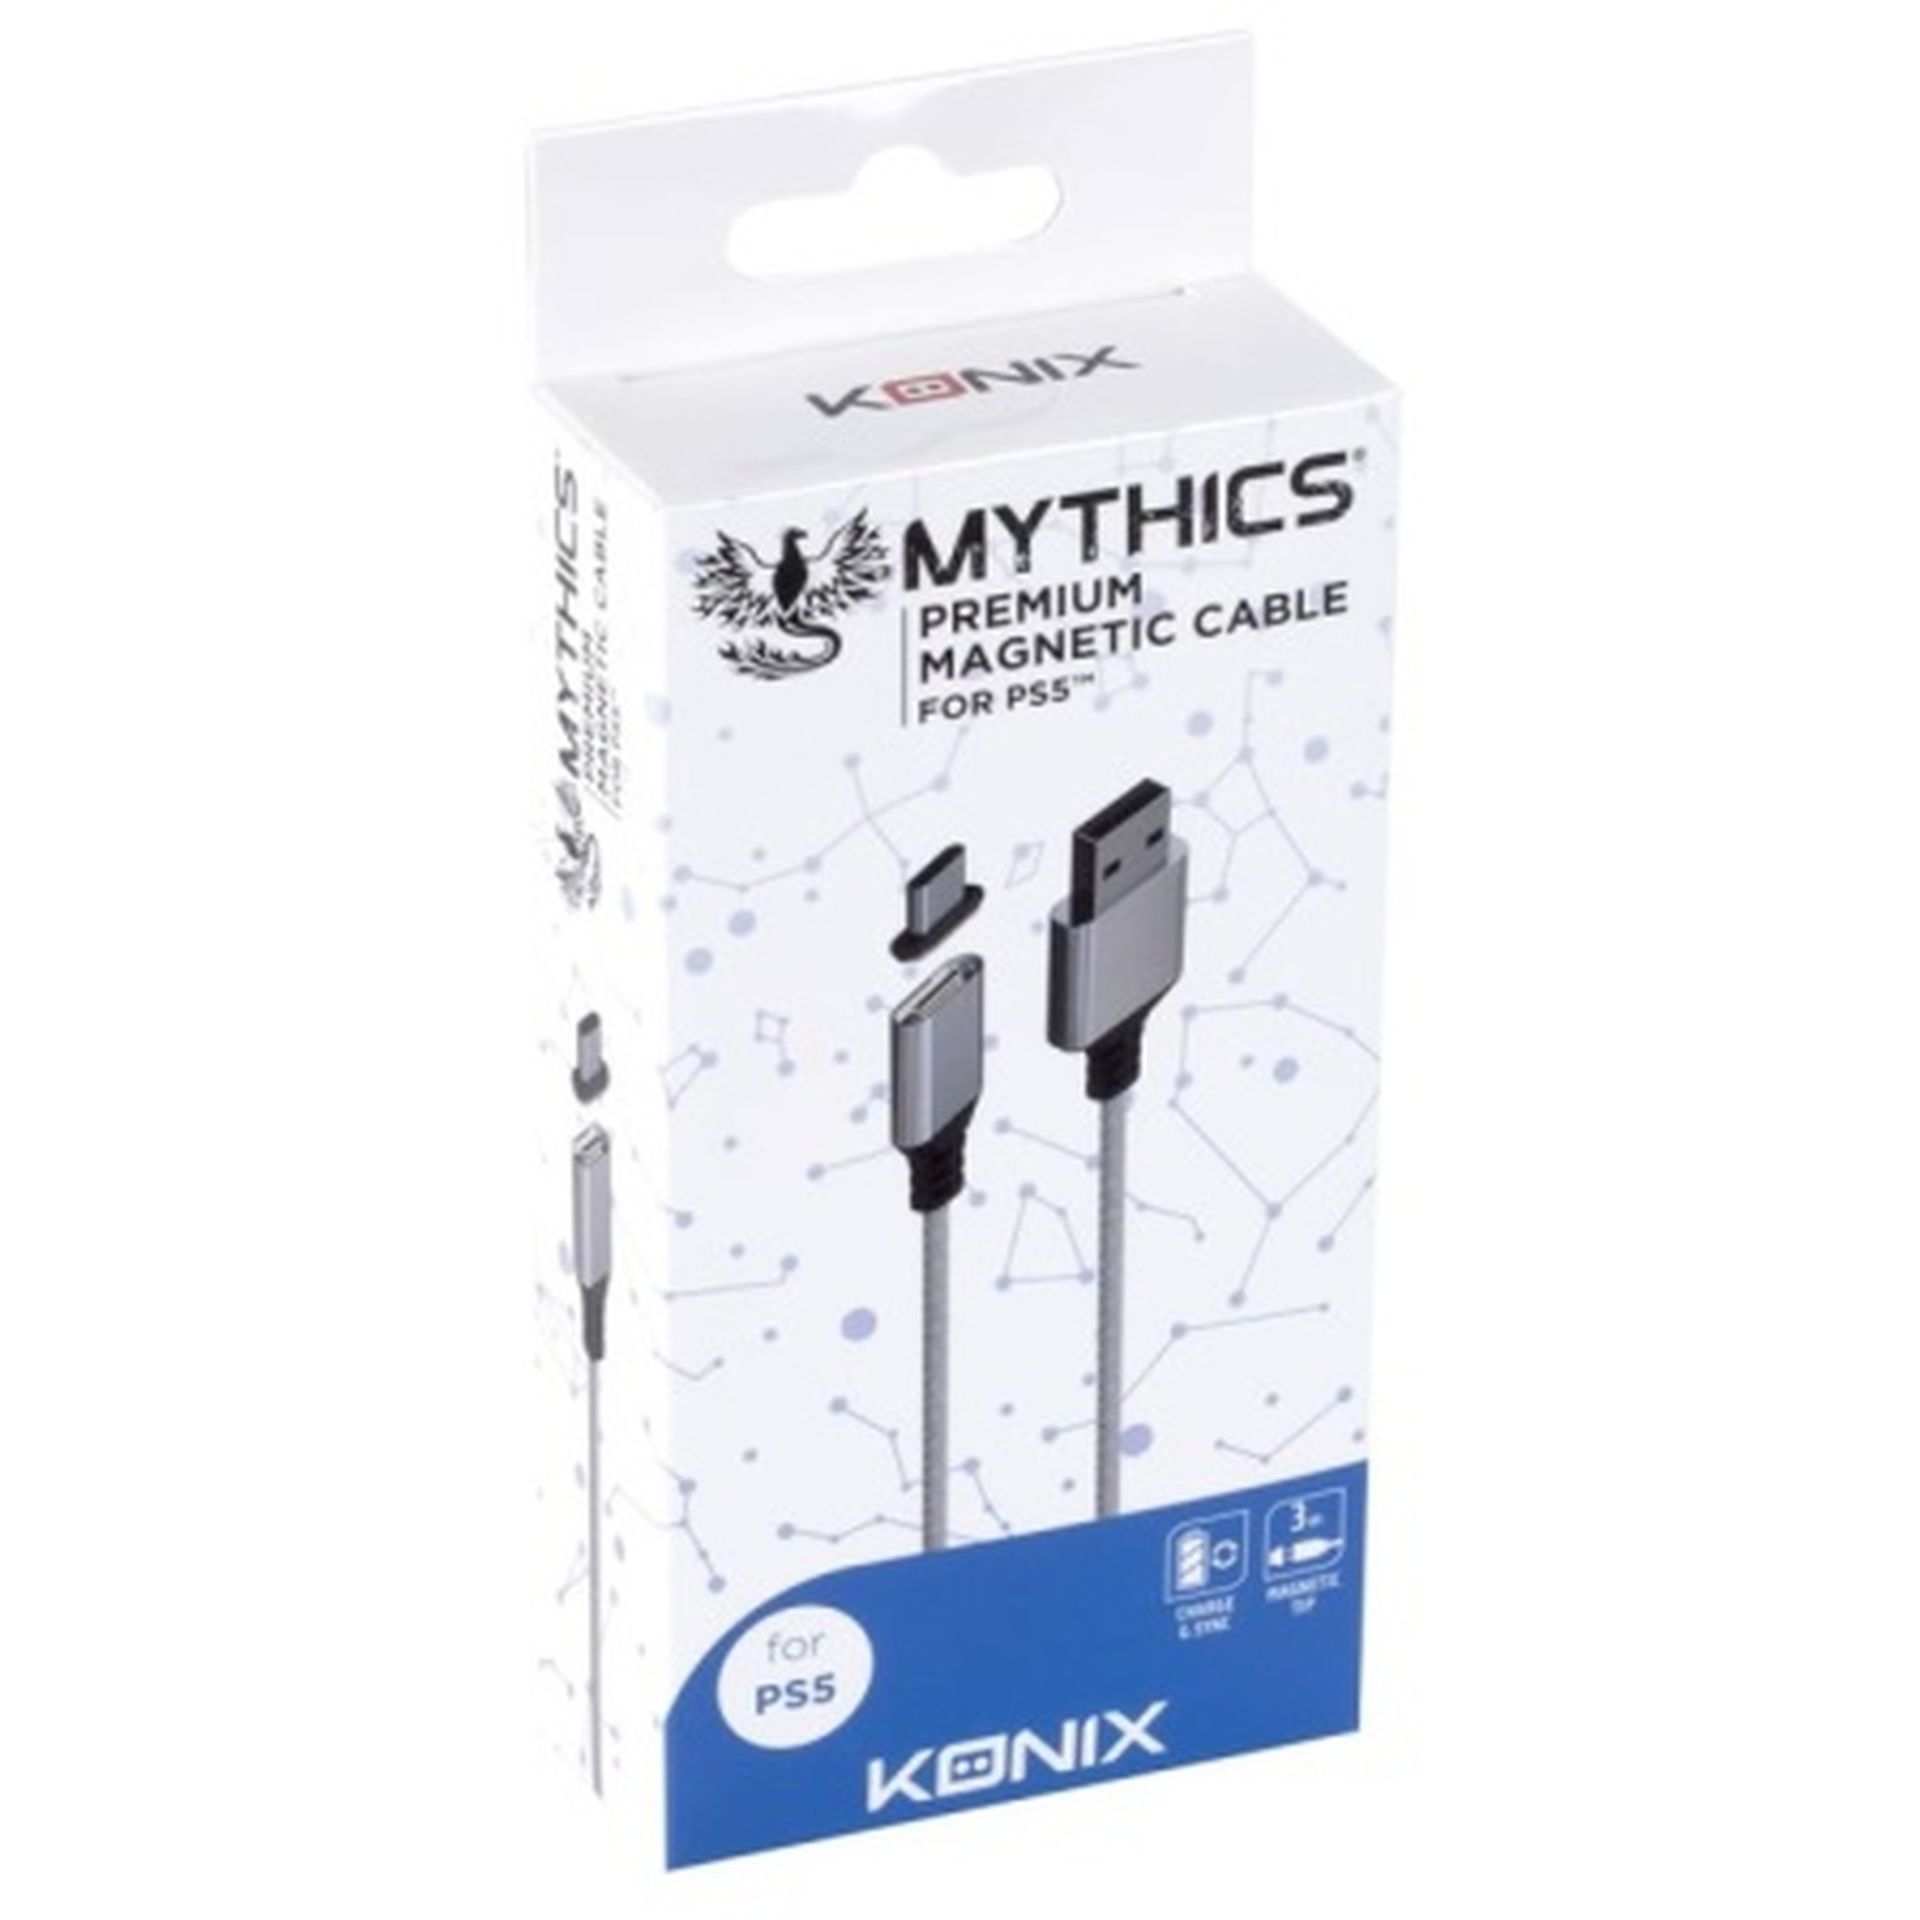 16x BRAND NEW KONIX MYTHICS PREMIUM MAGNETIC CABLE FOR PS5 CONTROLLERS. (R15-12)